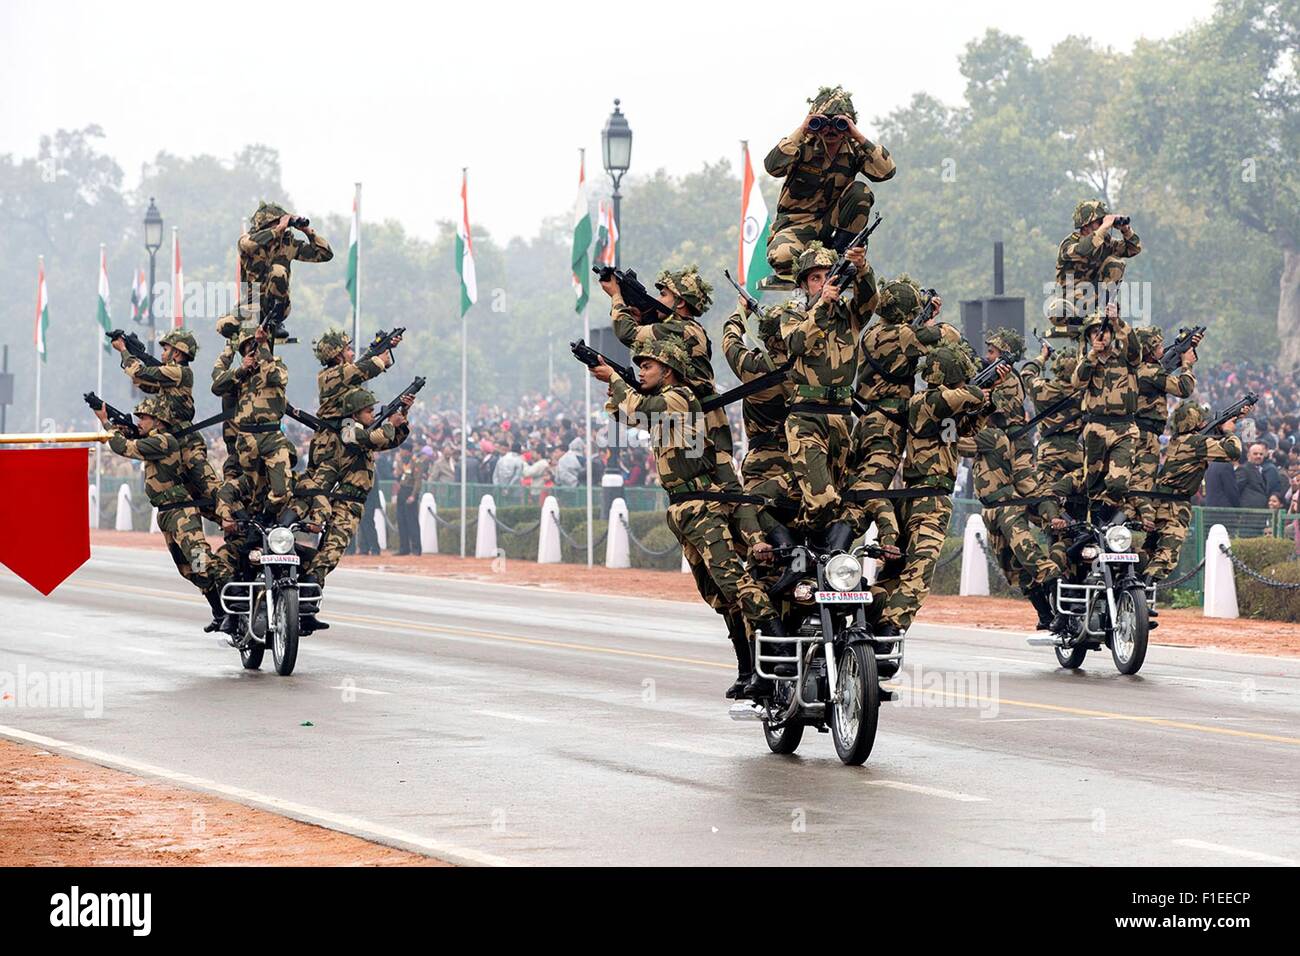 Members of the India's Border Security Force Dare Devils on motorcycles pass the review stand during the Republic Day Parade January 26, 2015 in New Delhi, India. Stock Photo